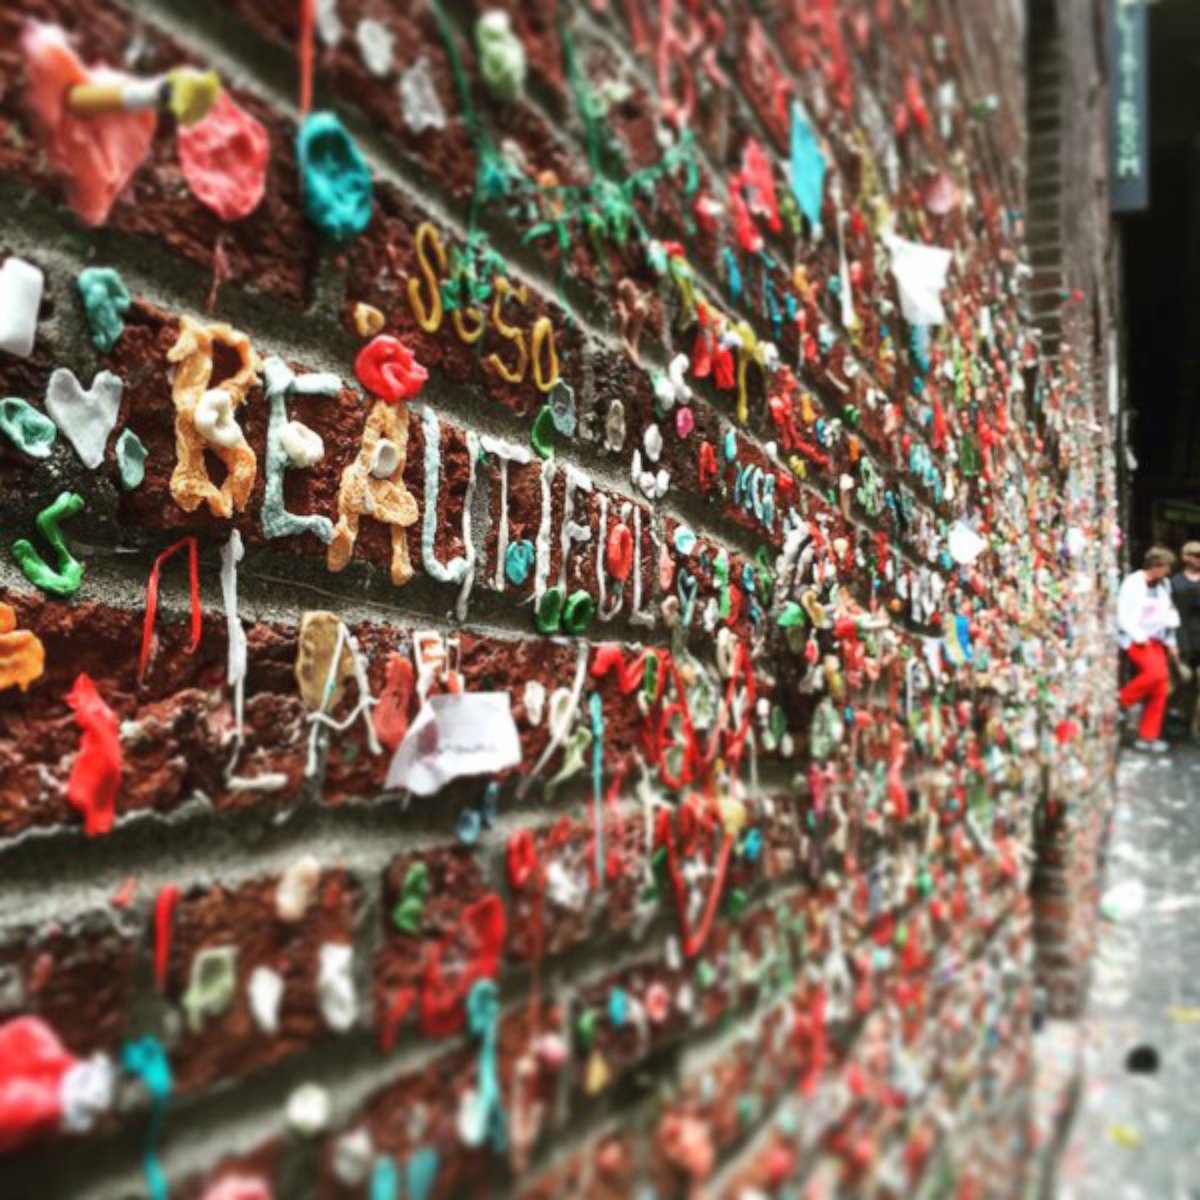 PHOTO: Stacy deBruyn noticed the word "beautiful" written in gum while visiting the wall with her friend earlier this year.